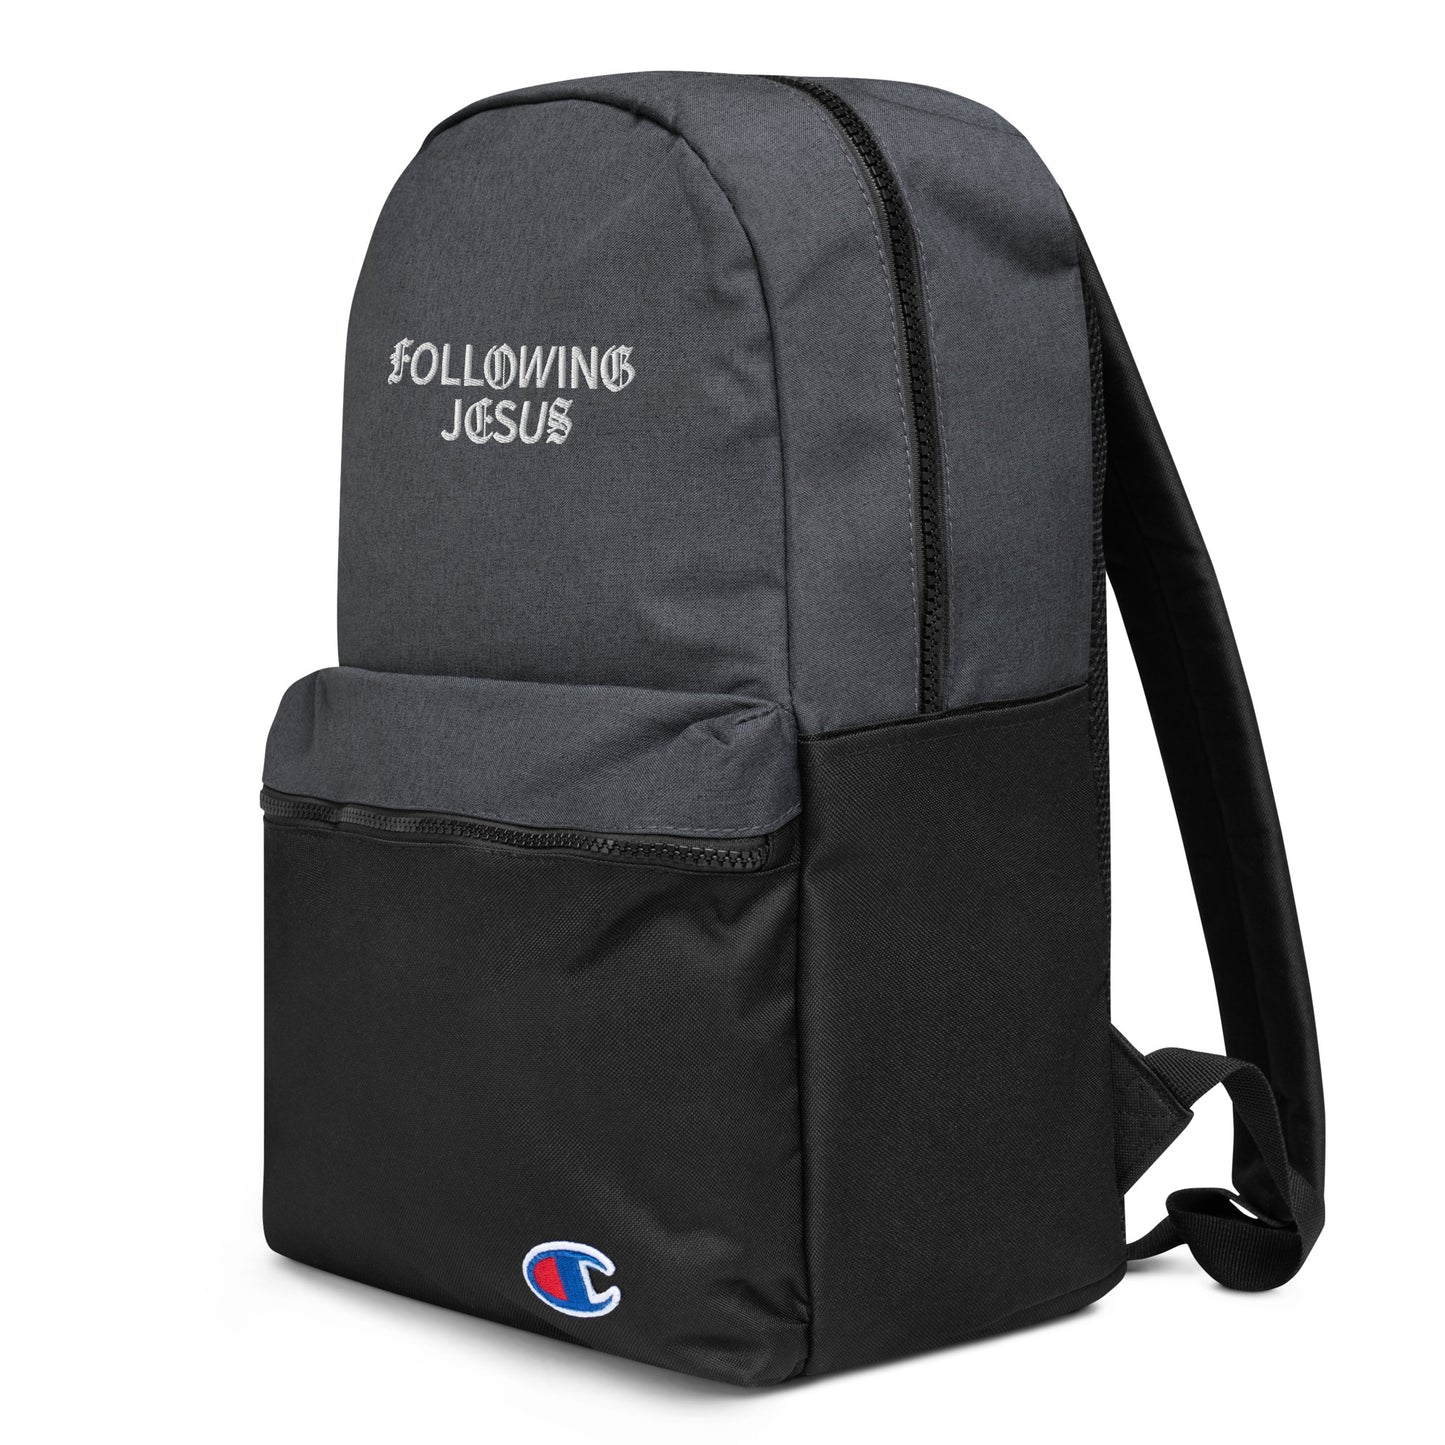 Following Jesus Champion Backpack